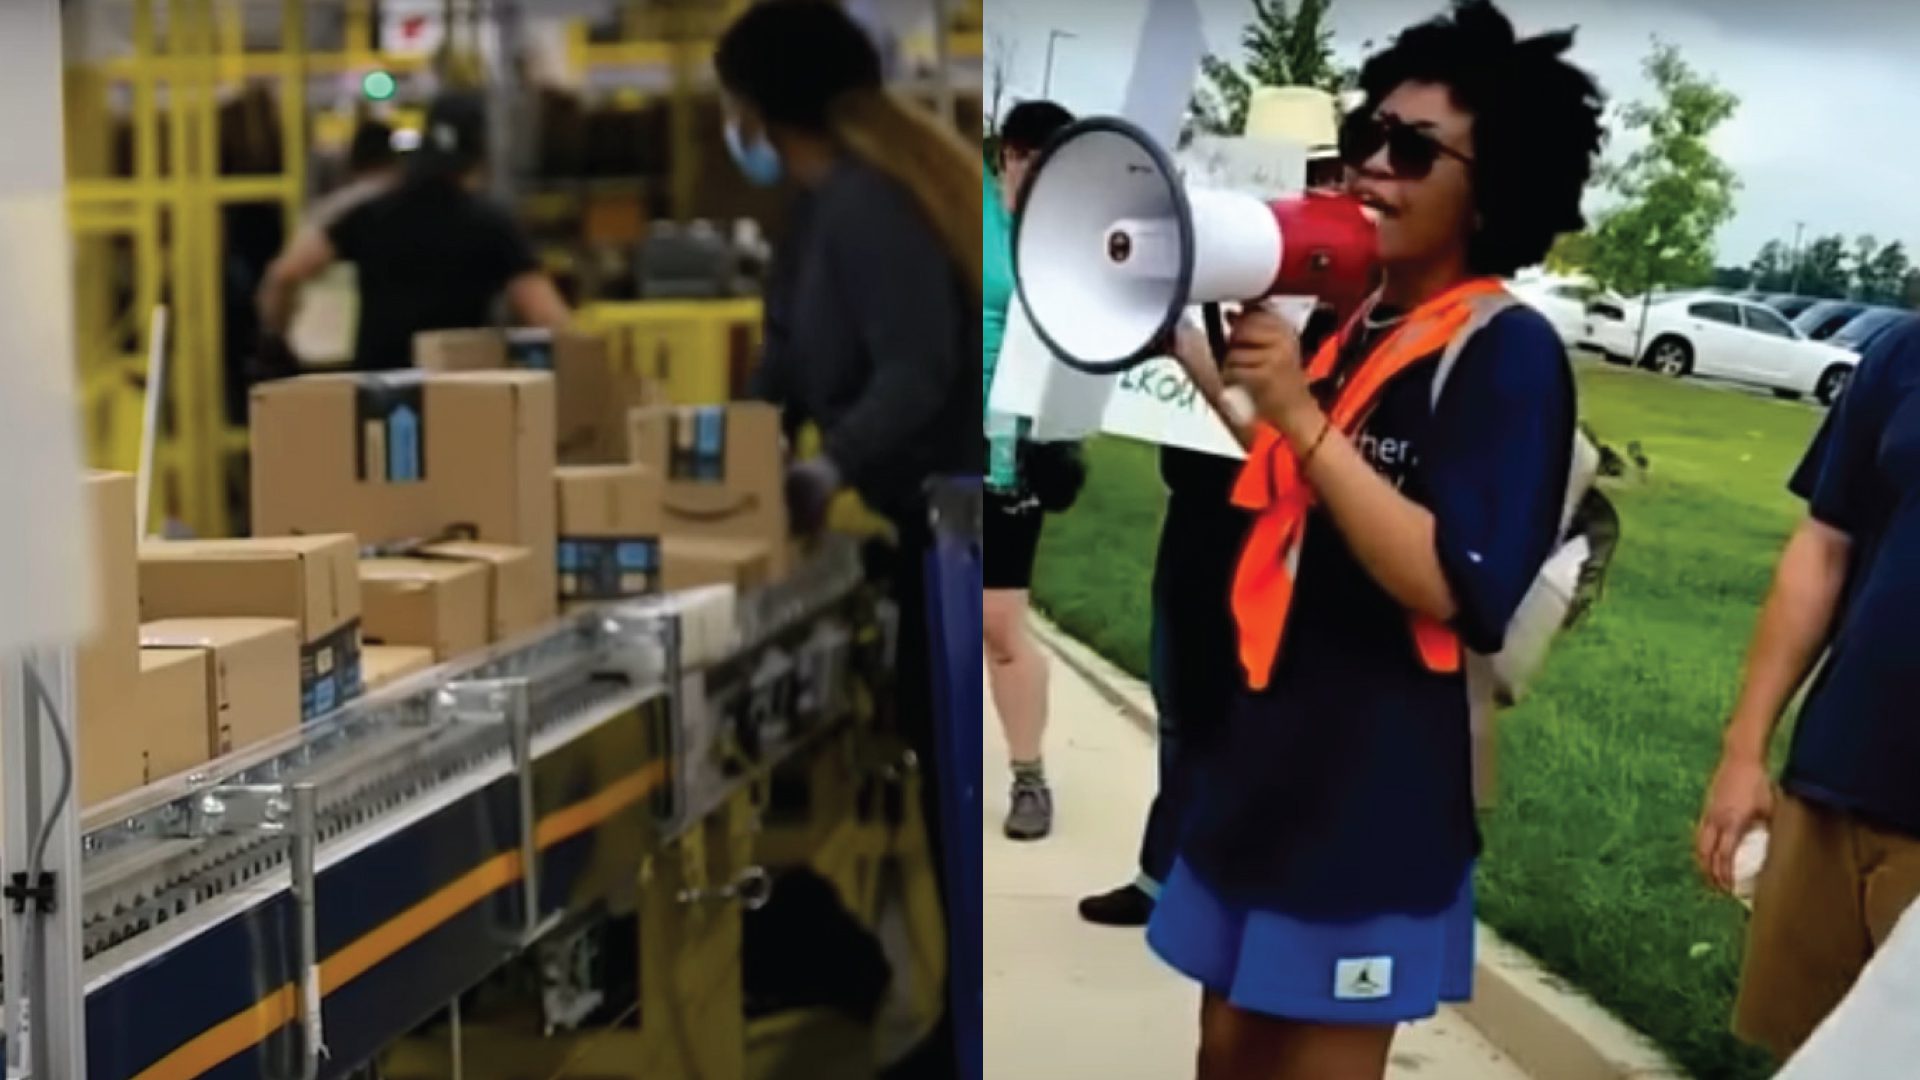 Amazon Workers Upset Over Conditions